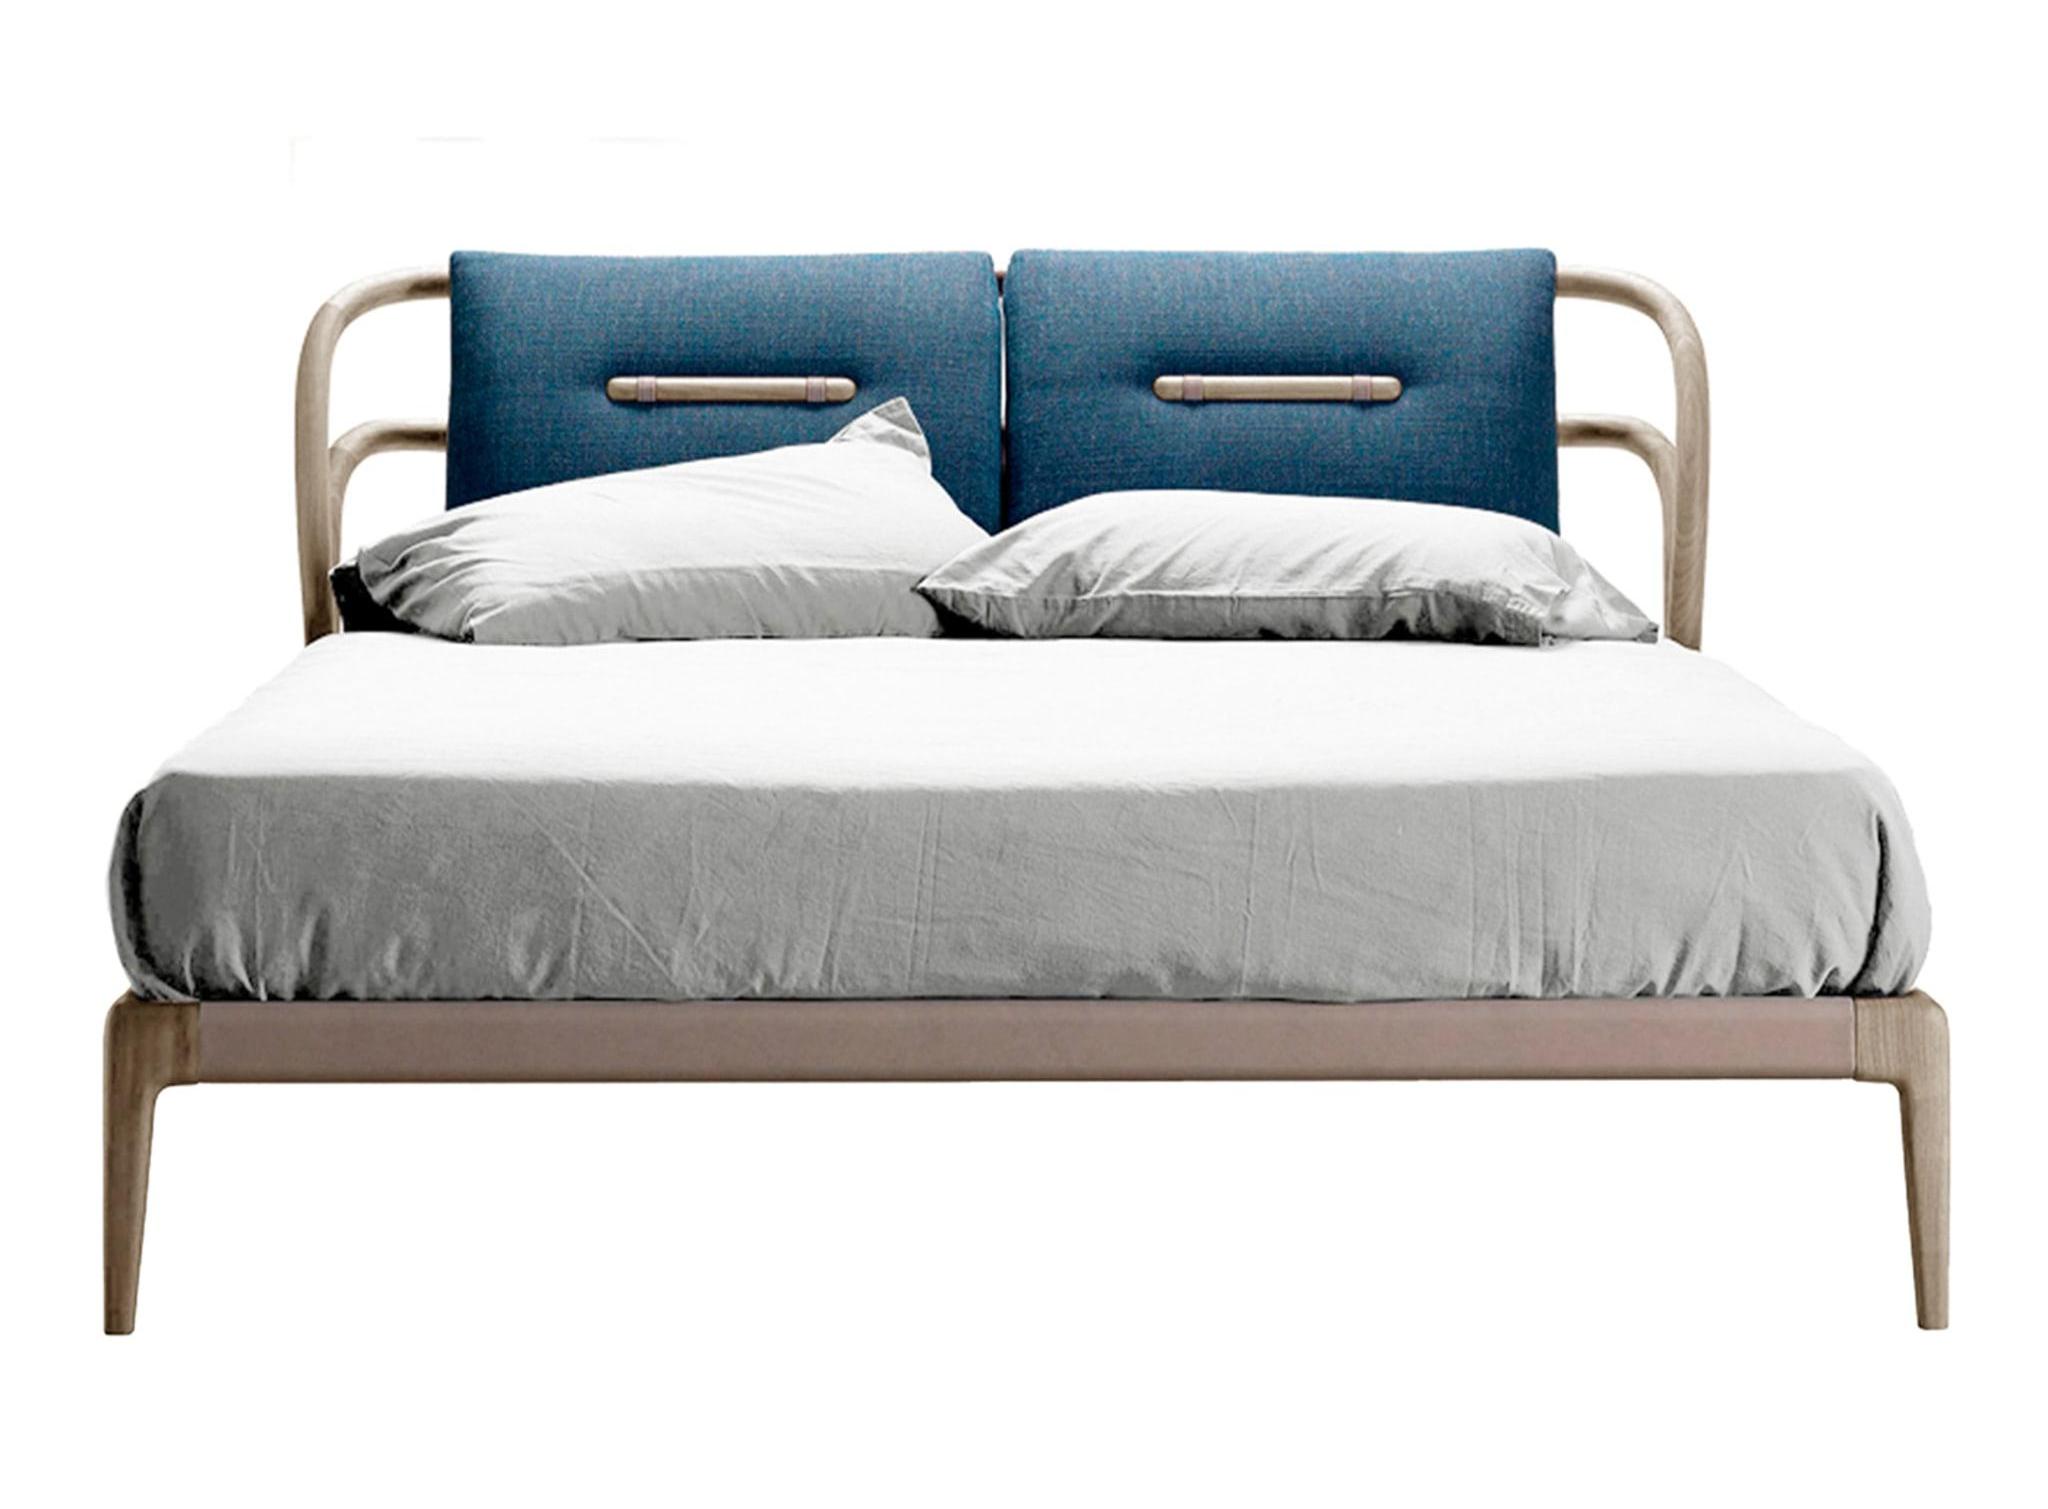 Smusso Classic Italian Bed